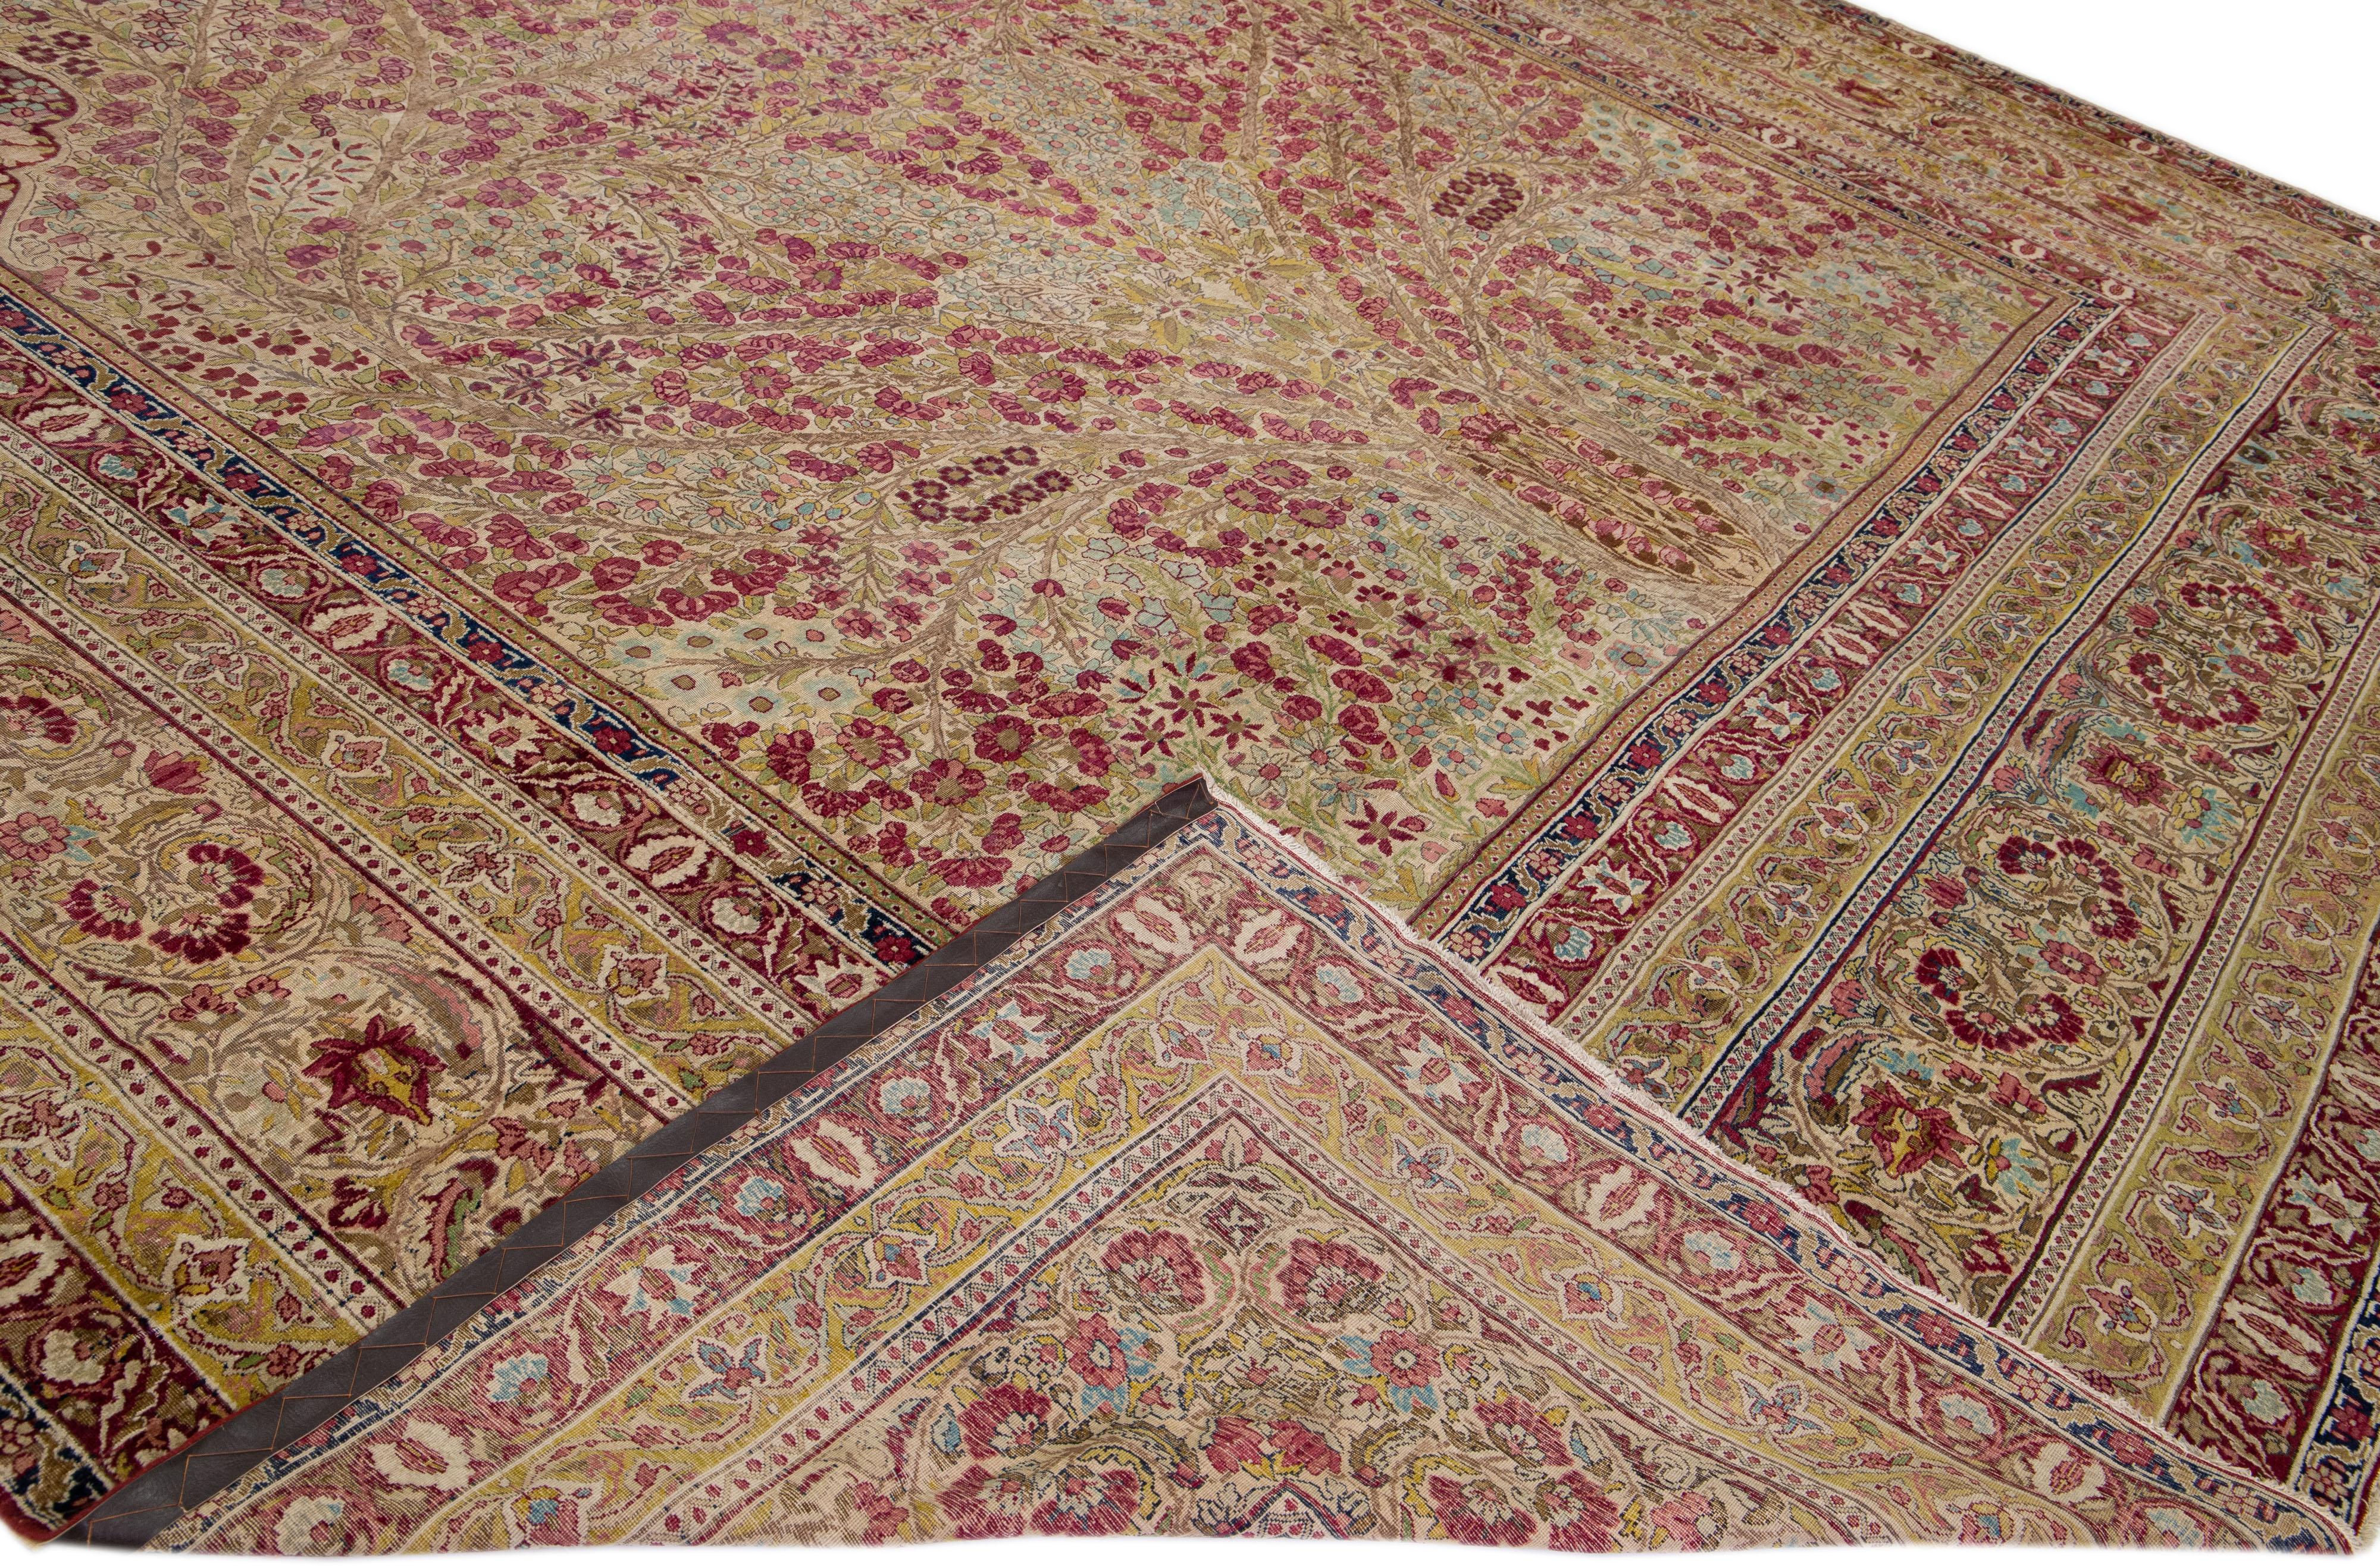 Beautiful antique Kerman hand-knotted wool rug with a beige and rose field. This Persian rug has a designed frame and multicolor accents in a gorgeous all-over rosette pattern design.

This rug measures: 14'3